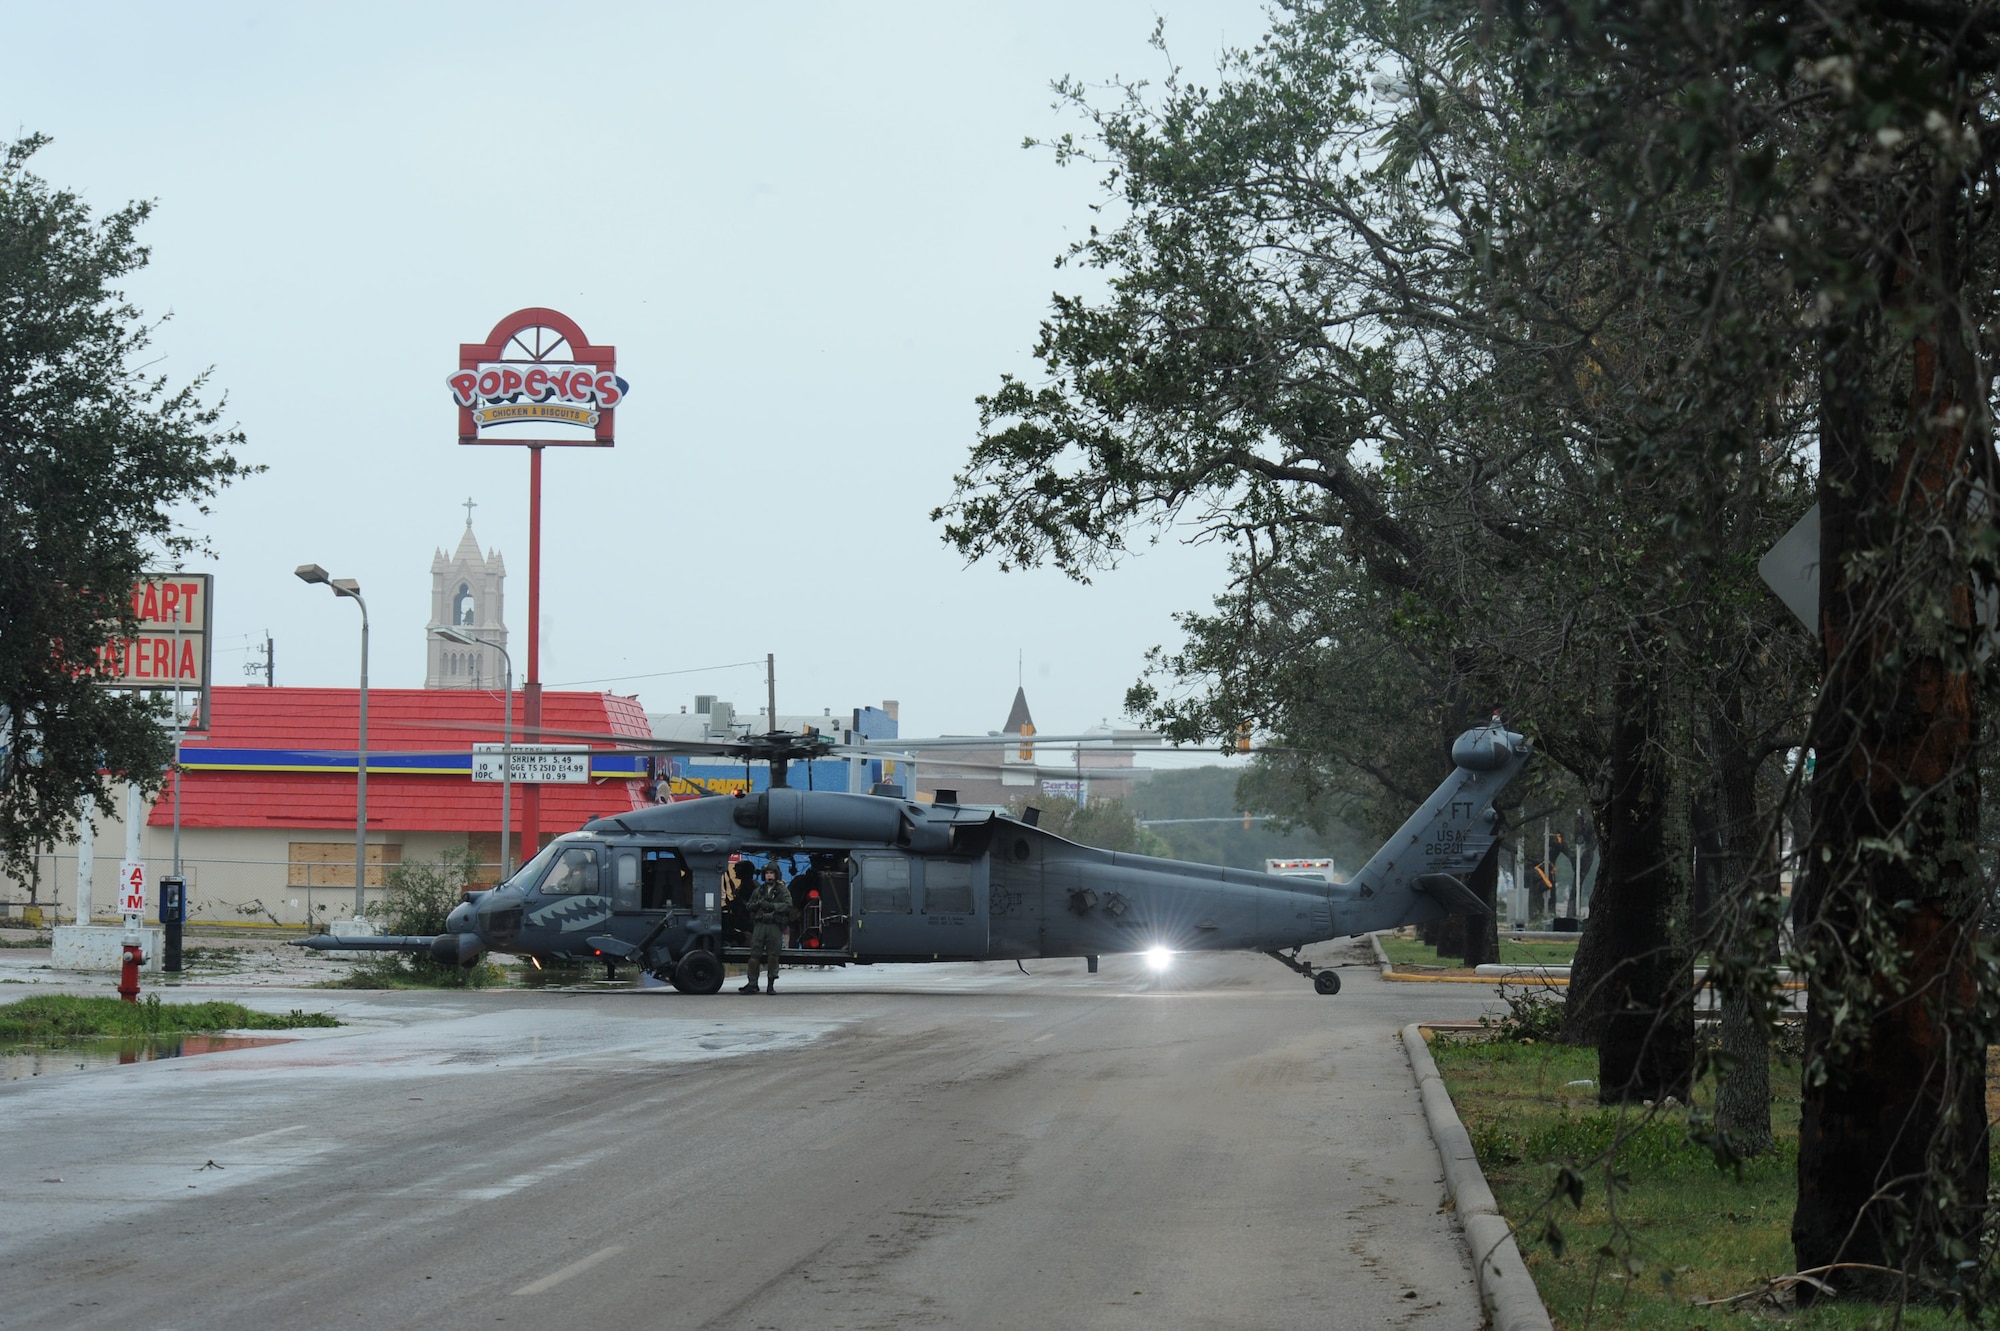 An HH-60 Pave Hawk assigned to the 331st Air Expeditionary Group at Randolph Air Force Base, Texas, sits in the street during operations in Galveston, Texas, after Hurricane Ike, Sept. 13. (U.S. Air Force photo/Staff Sgt. James L. Harper Jr.)
